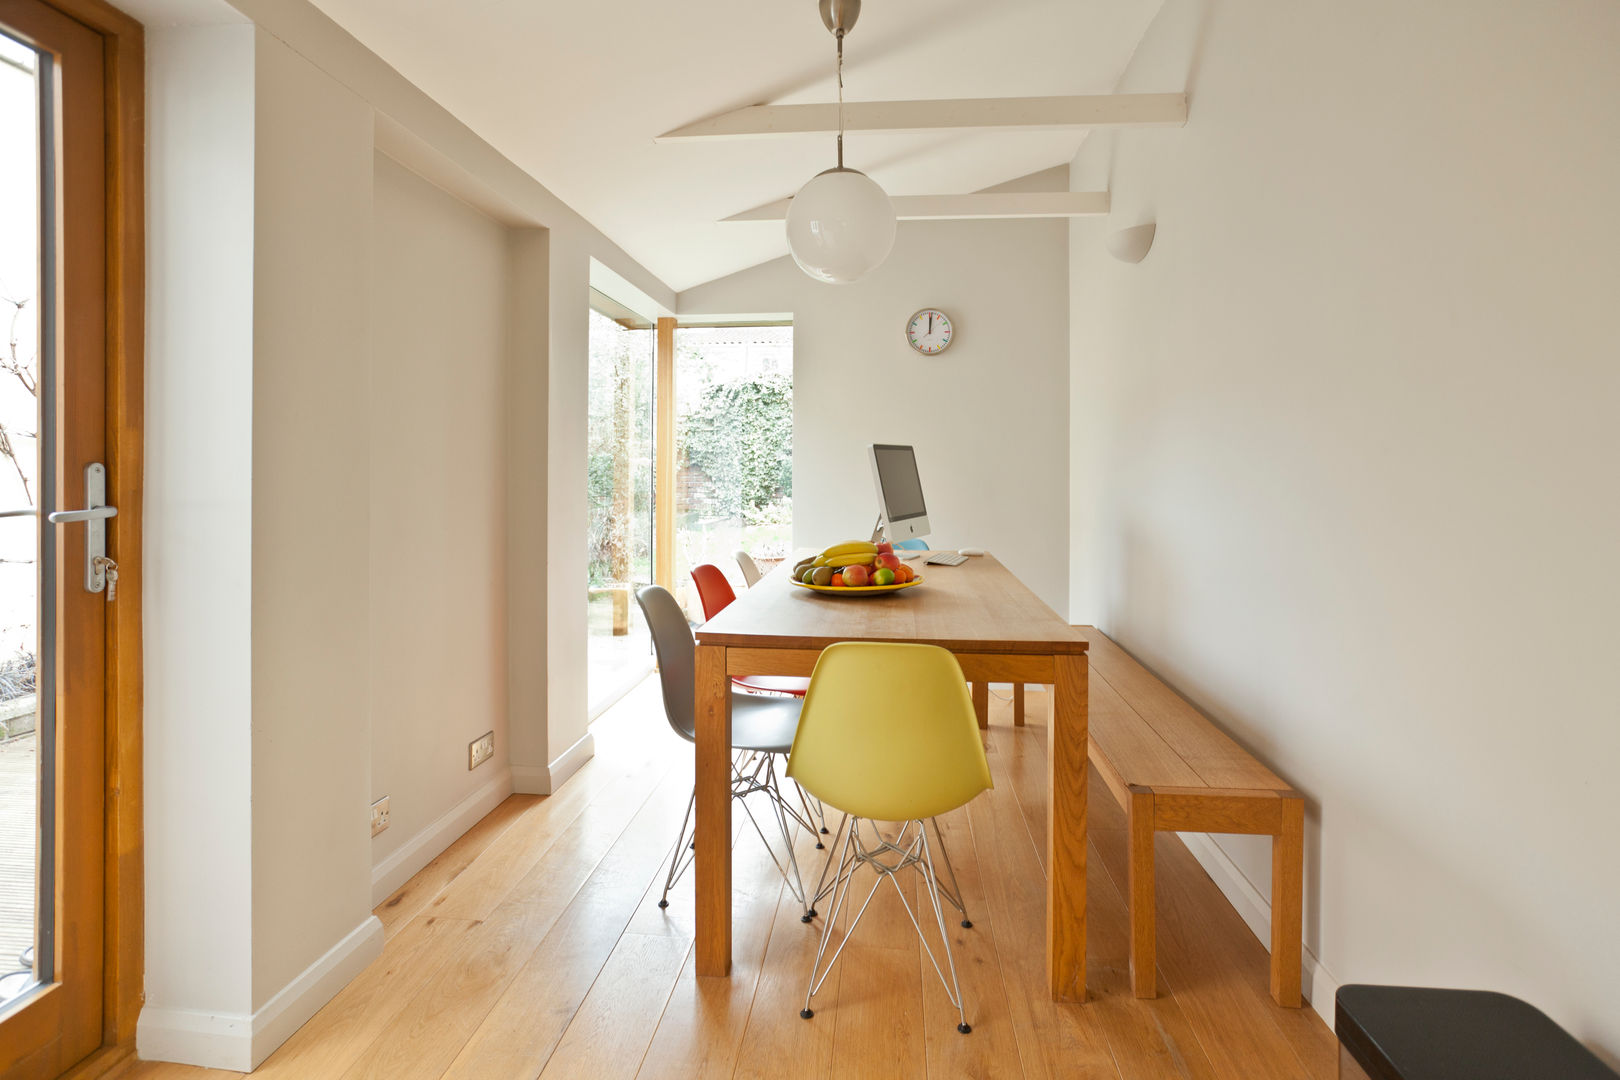 Kitchen remodelling in South Bristol Dittrich Hudson Vasetti Architects Ruang Makan Modern